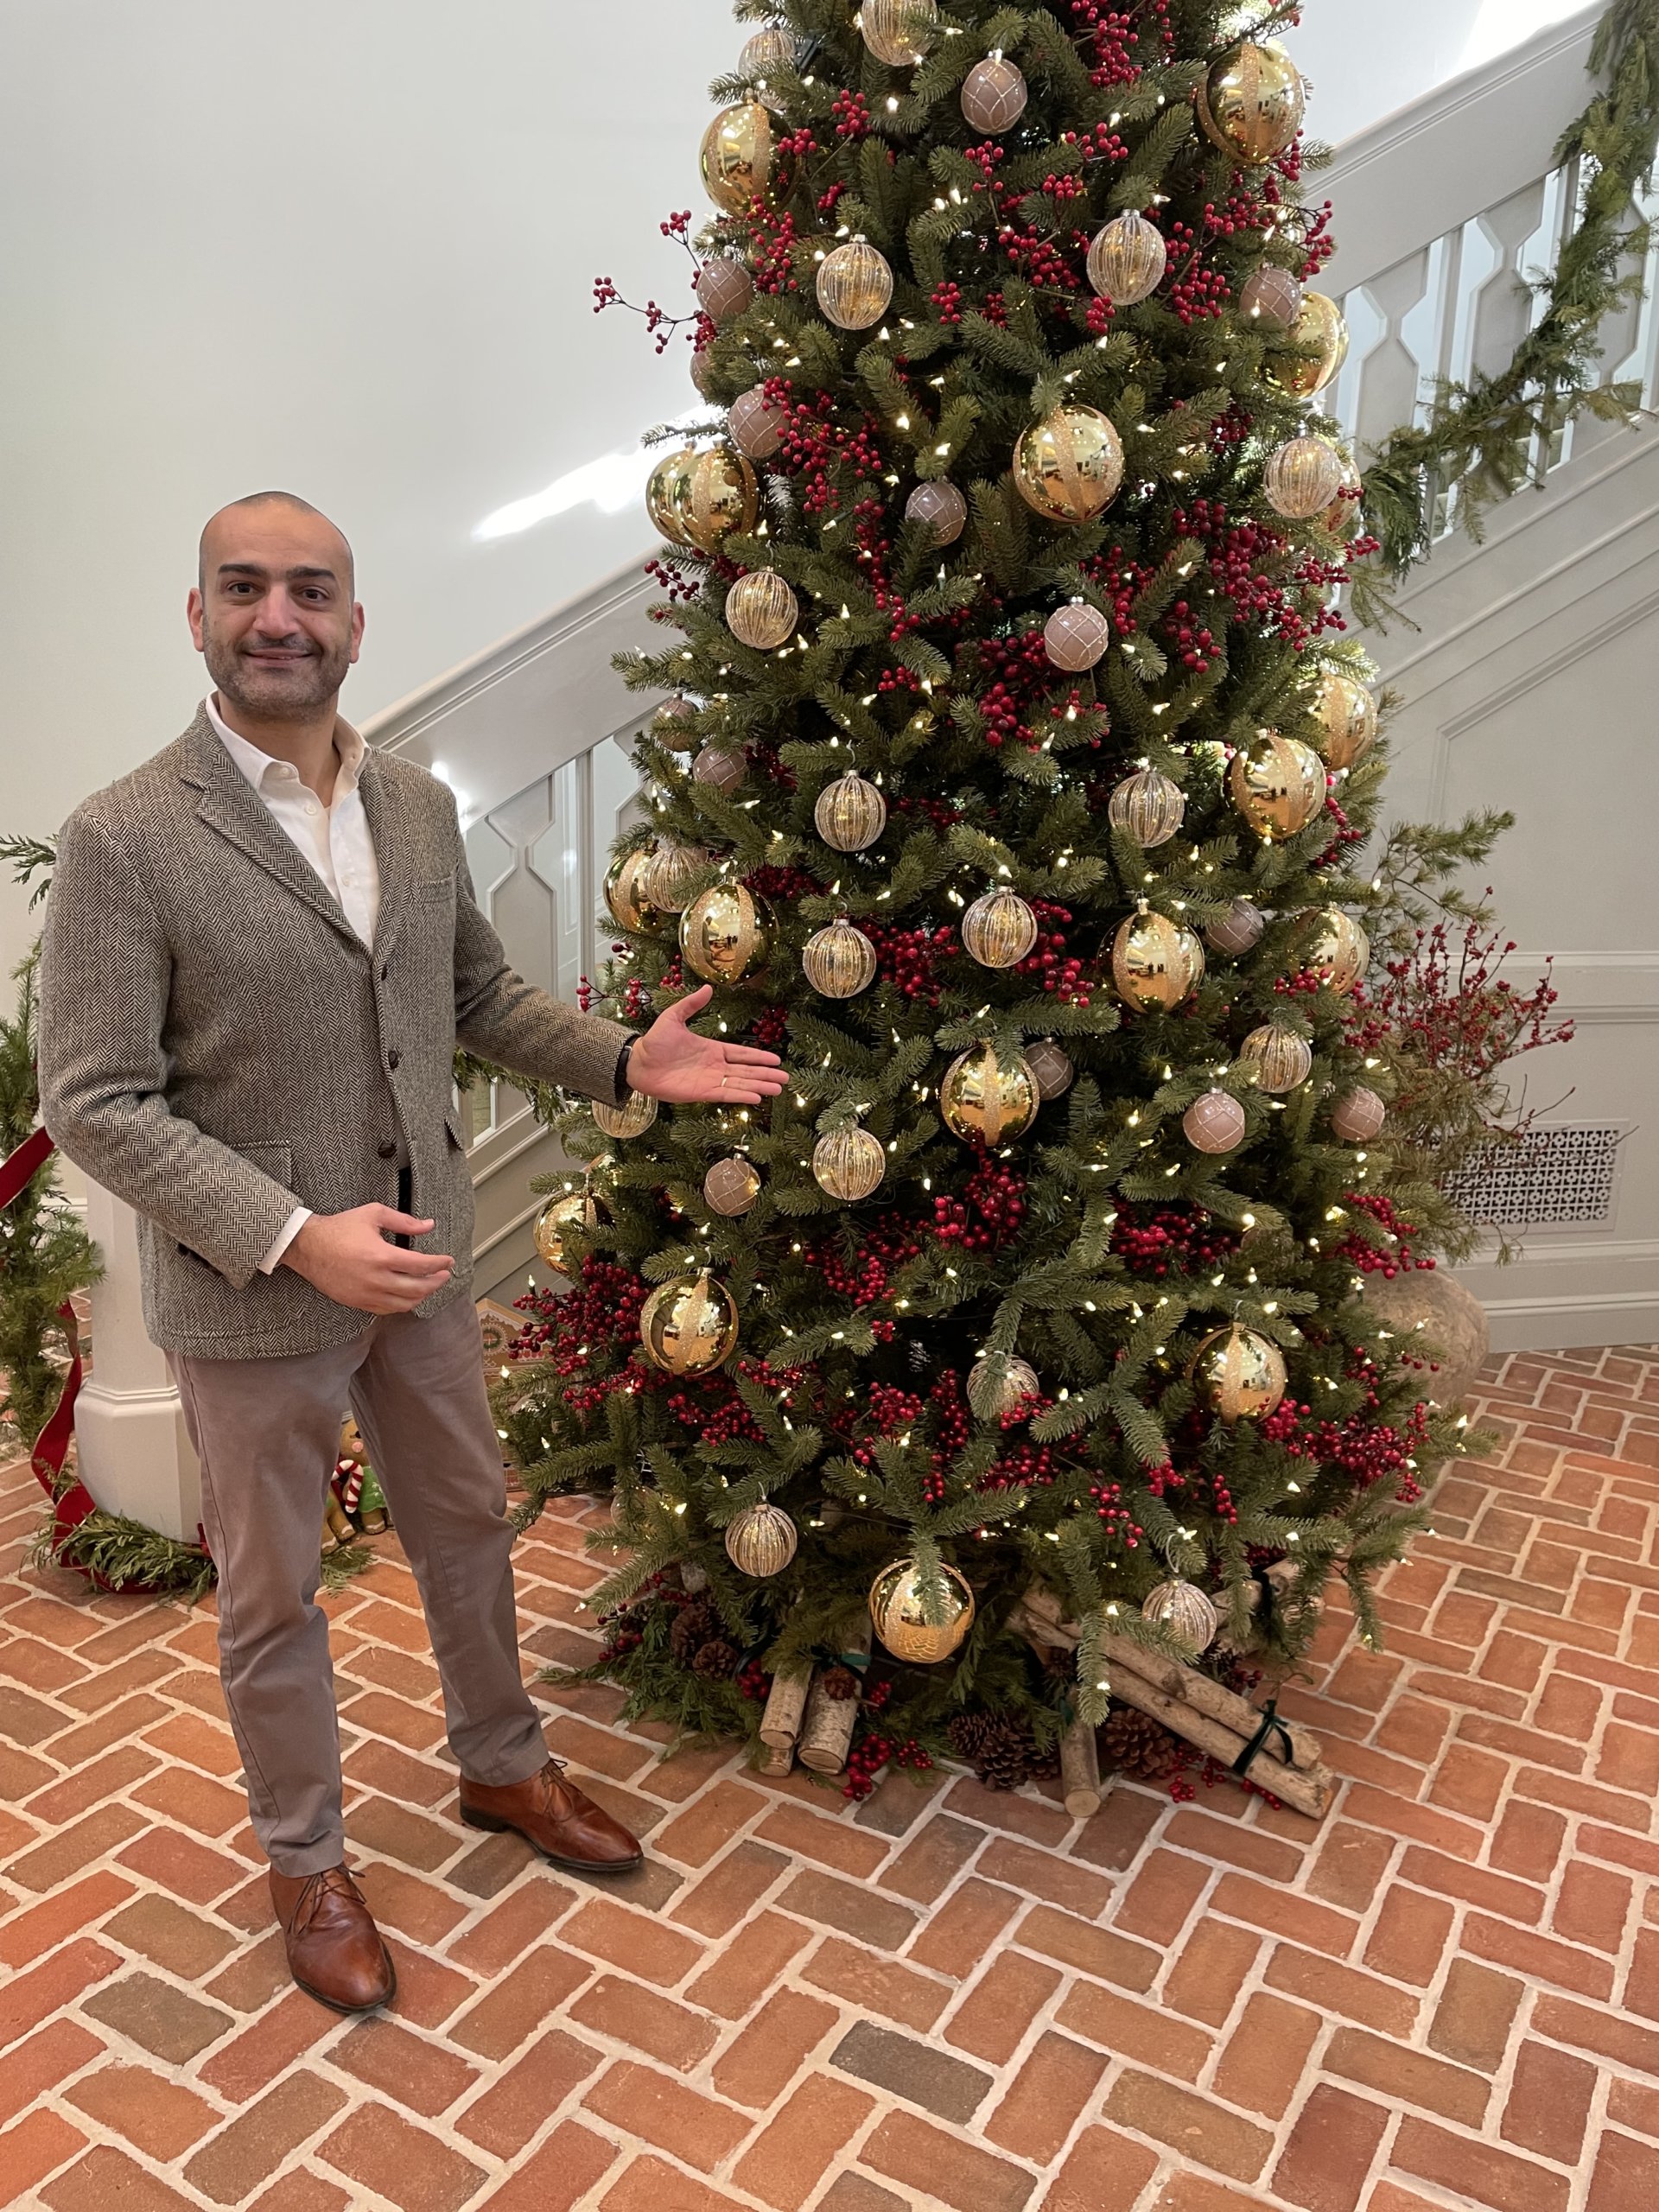 Canoe Place Inn & Cottages manager Mario Arakelian with Christmas tree